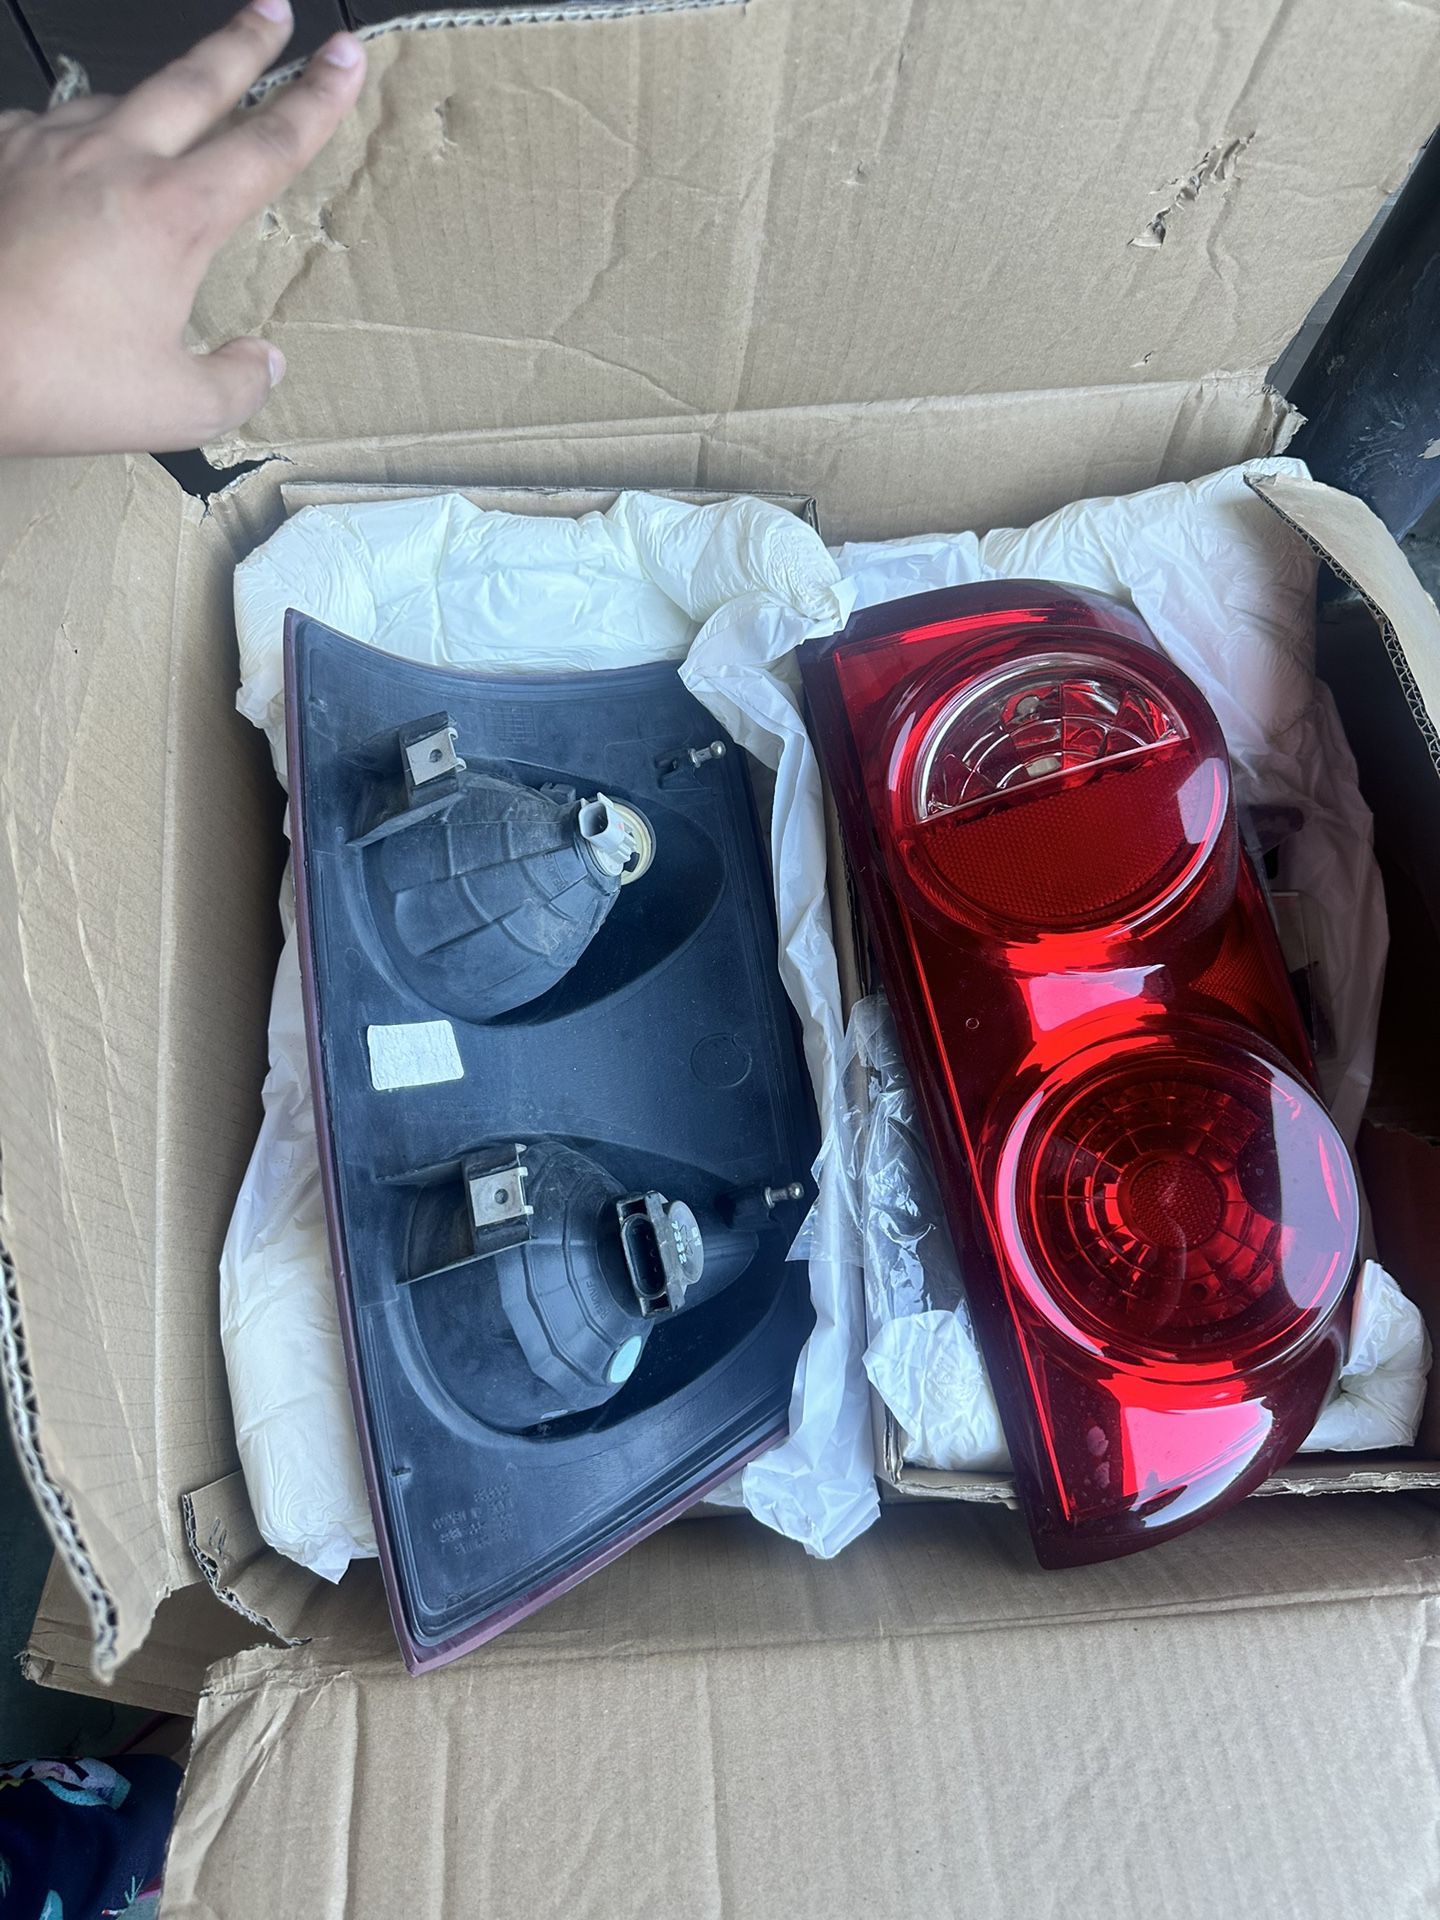 Ram 2008 headlights front and back so